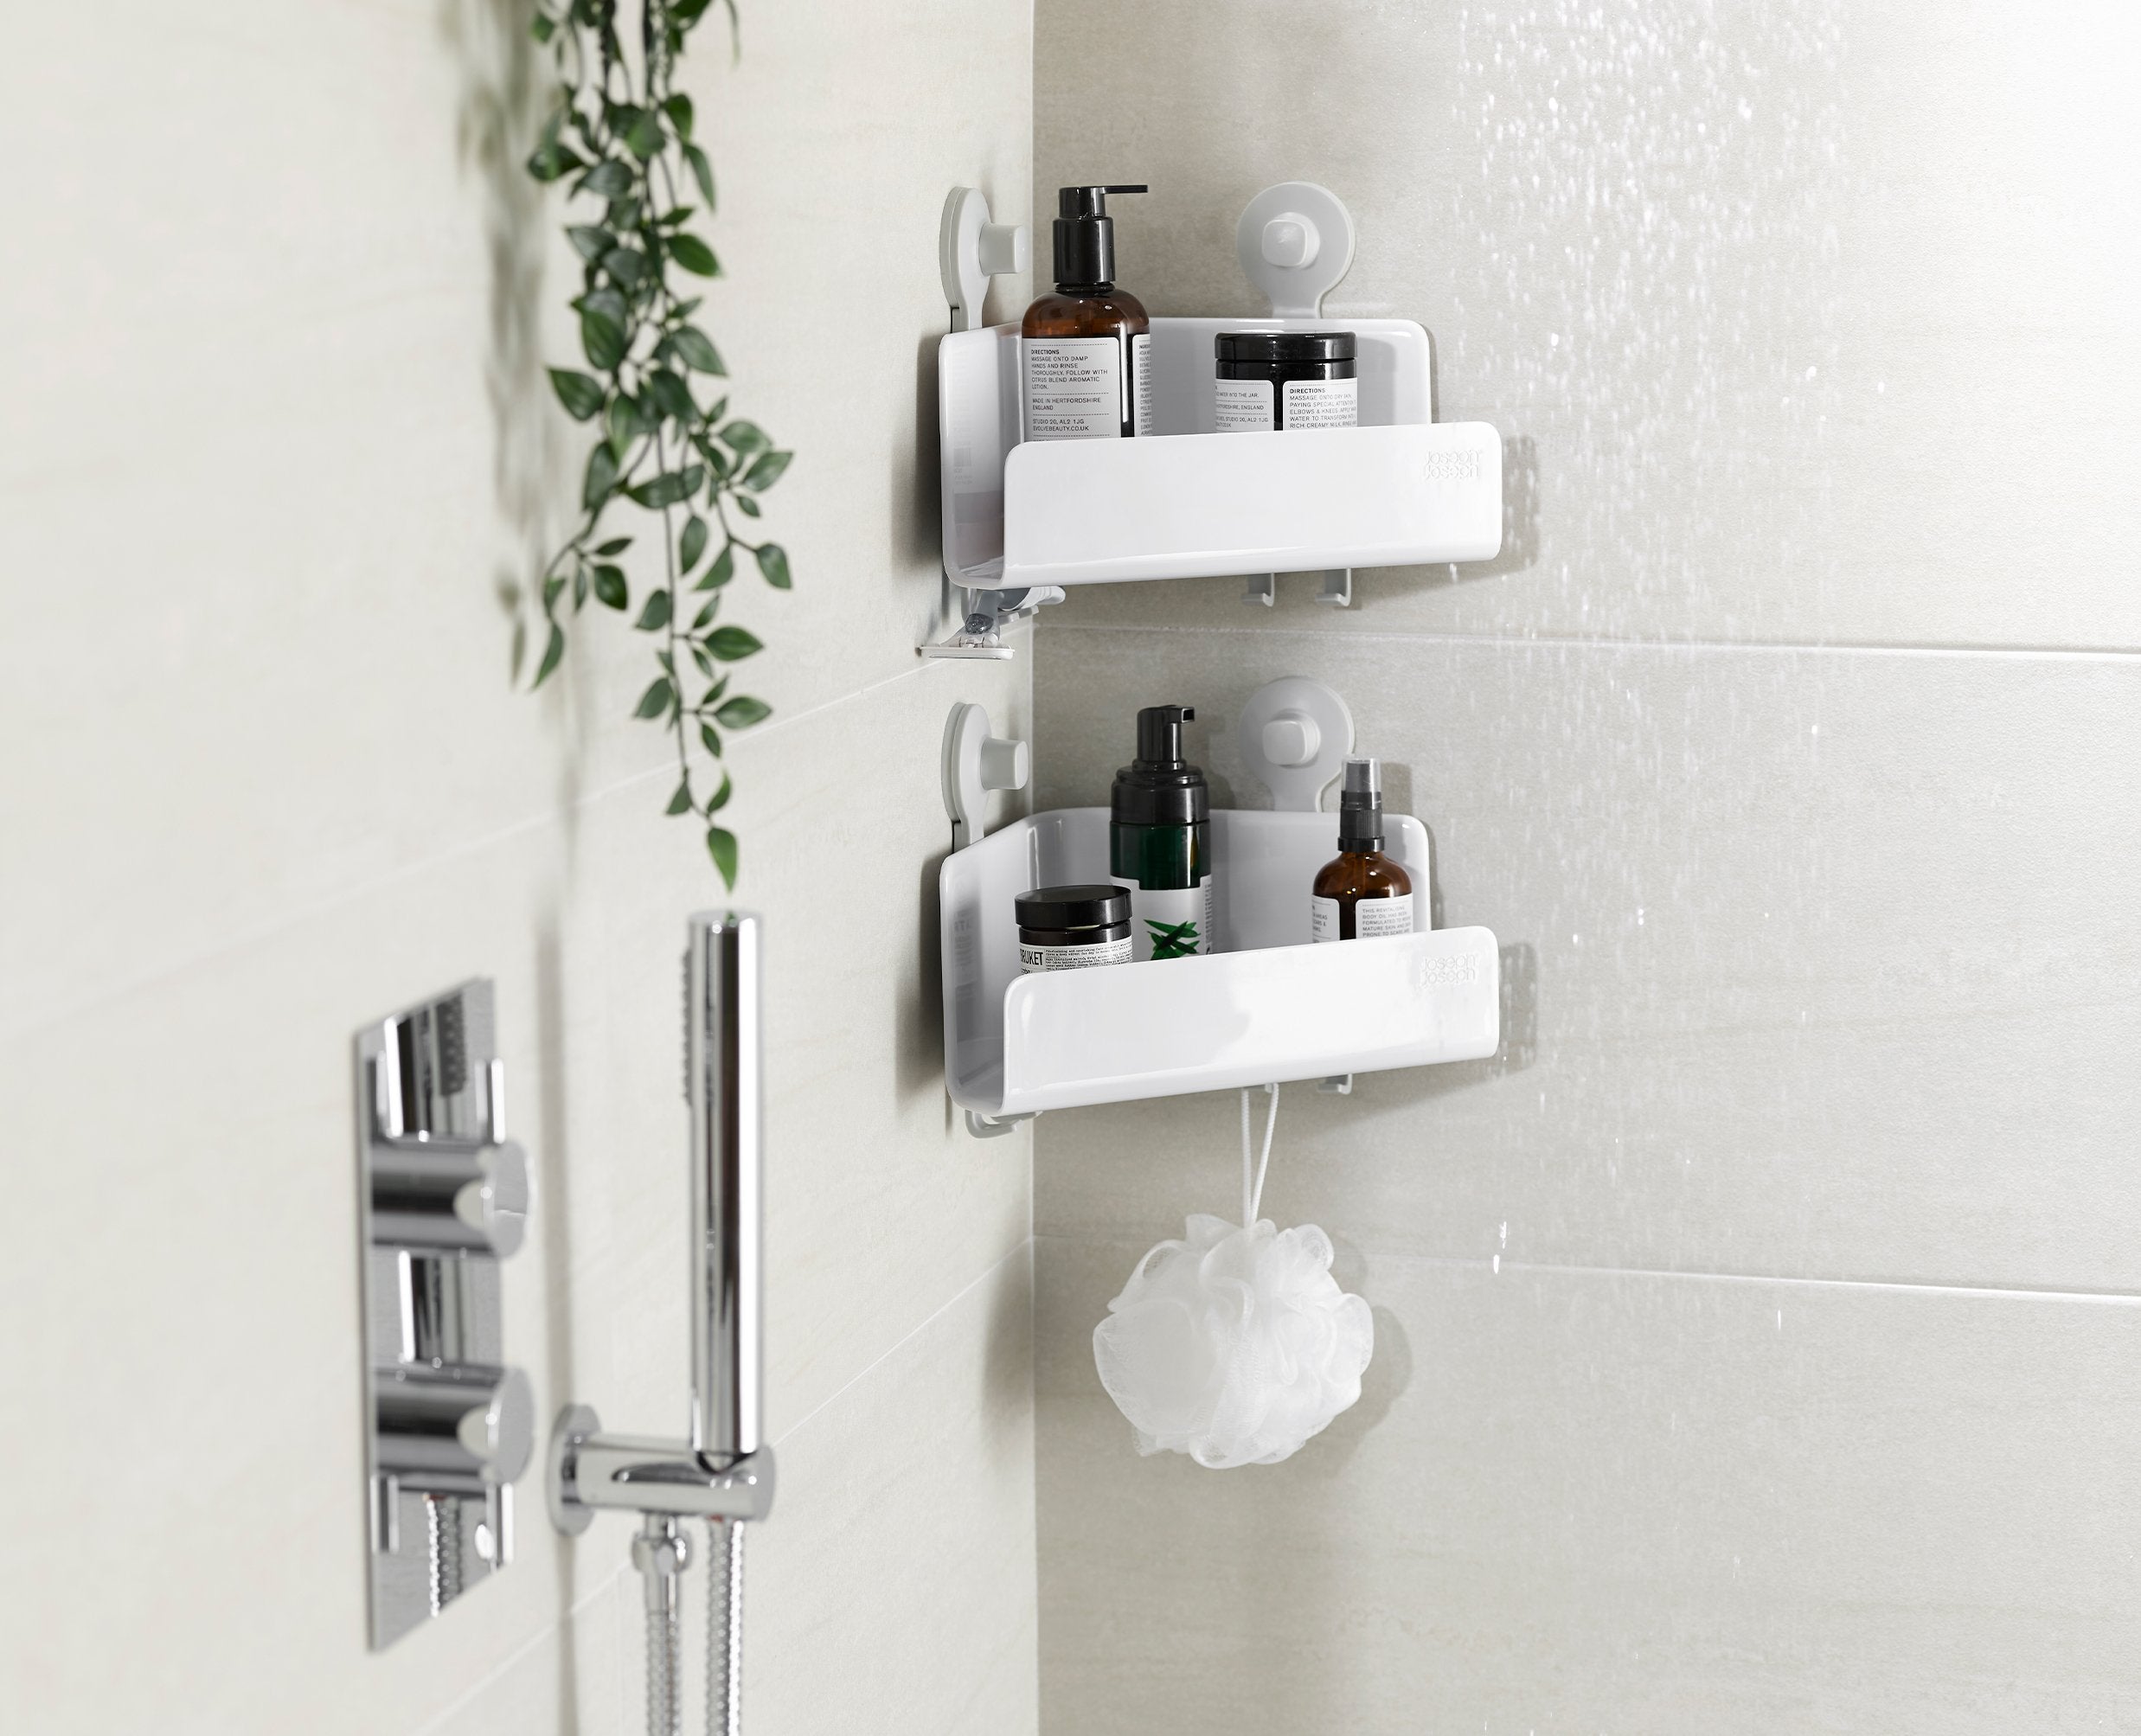 BEON.COM.AU  These corner shower shelves sit neatly in the corner of your shower to store your soap bars, shower gels and shampoo bottles and feature hooks for razors, sponges and flannels.  Self-draining design Handy storage hooks Lift-off shelf for easy cleaning  Easy tool-free installation using super-gri... Joseph Joseph at BEON.COM.AU